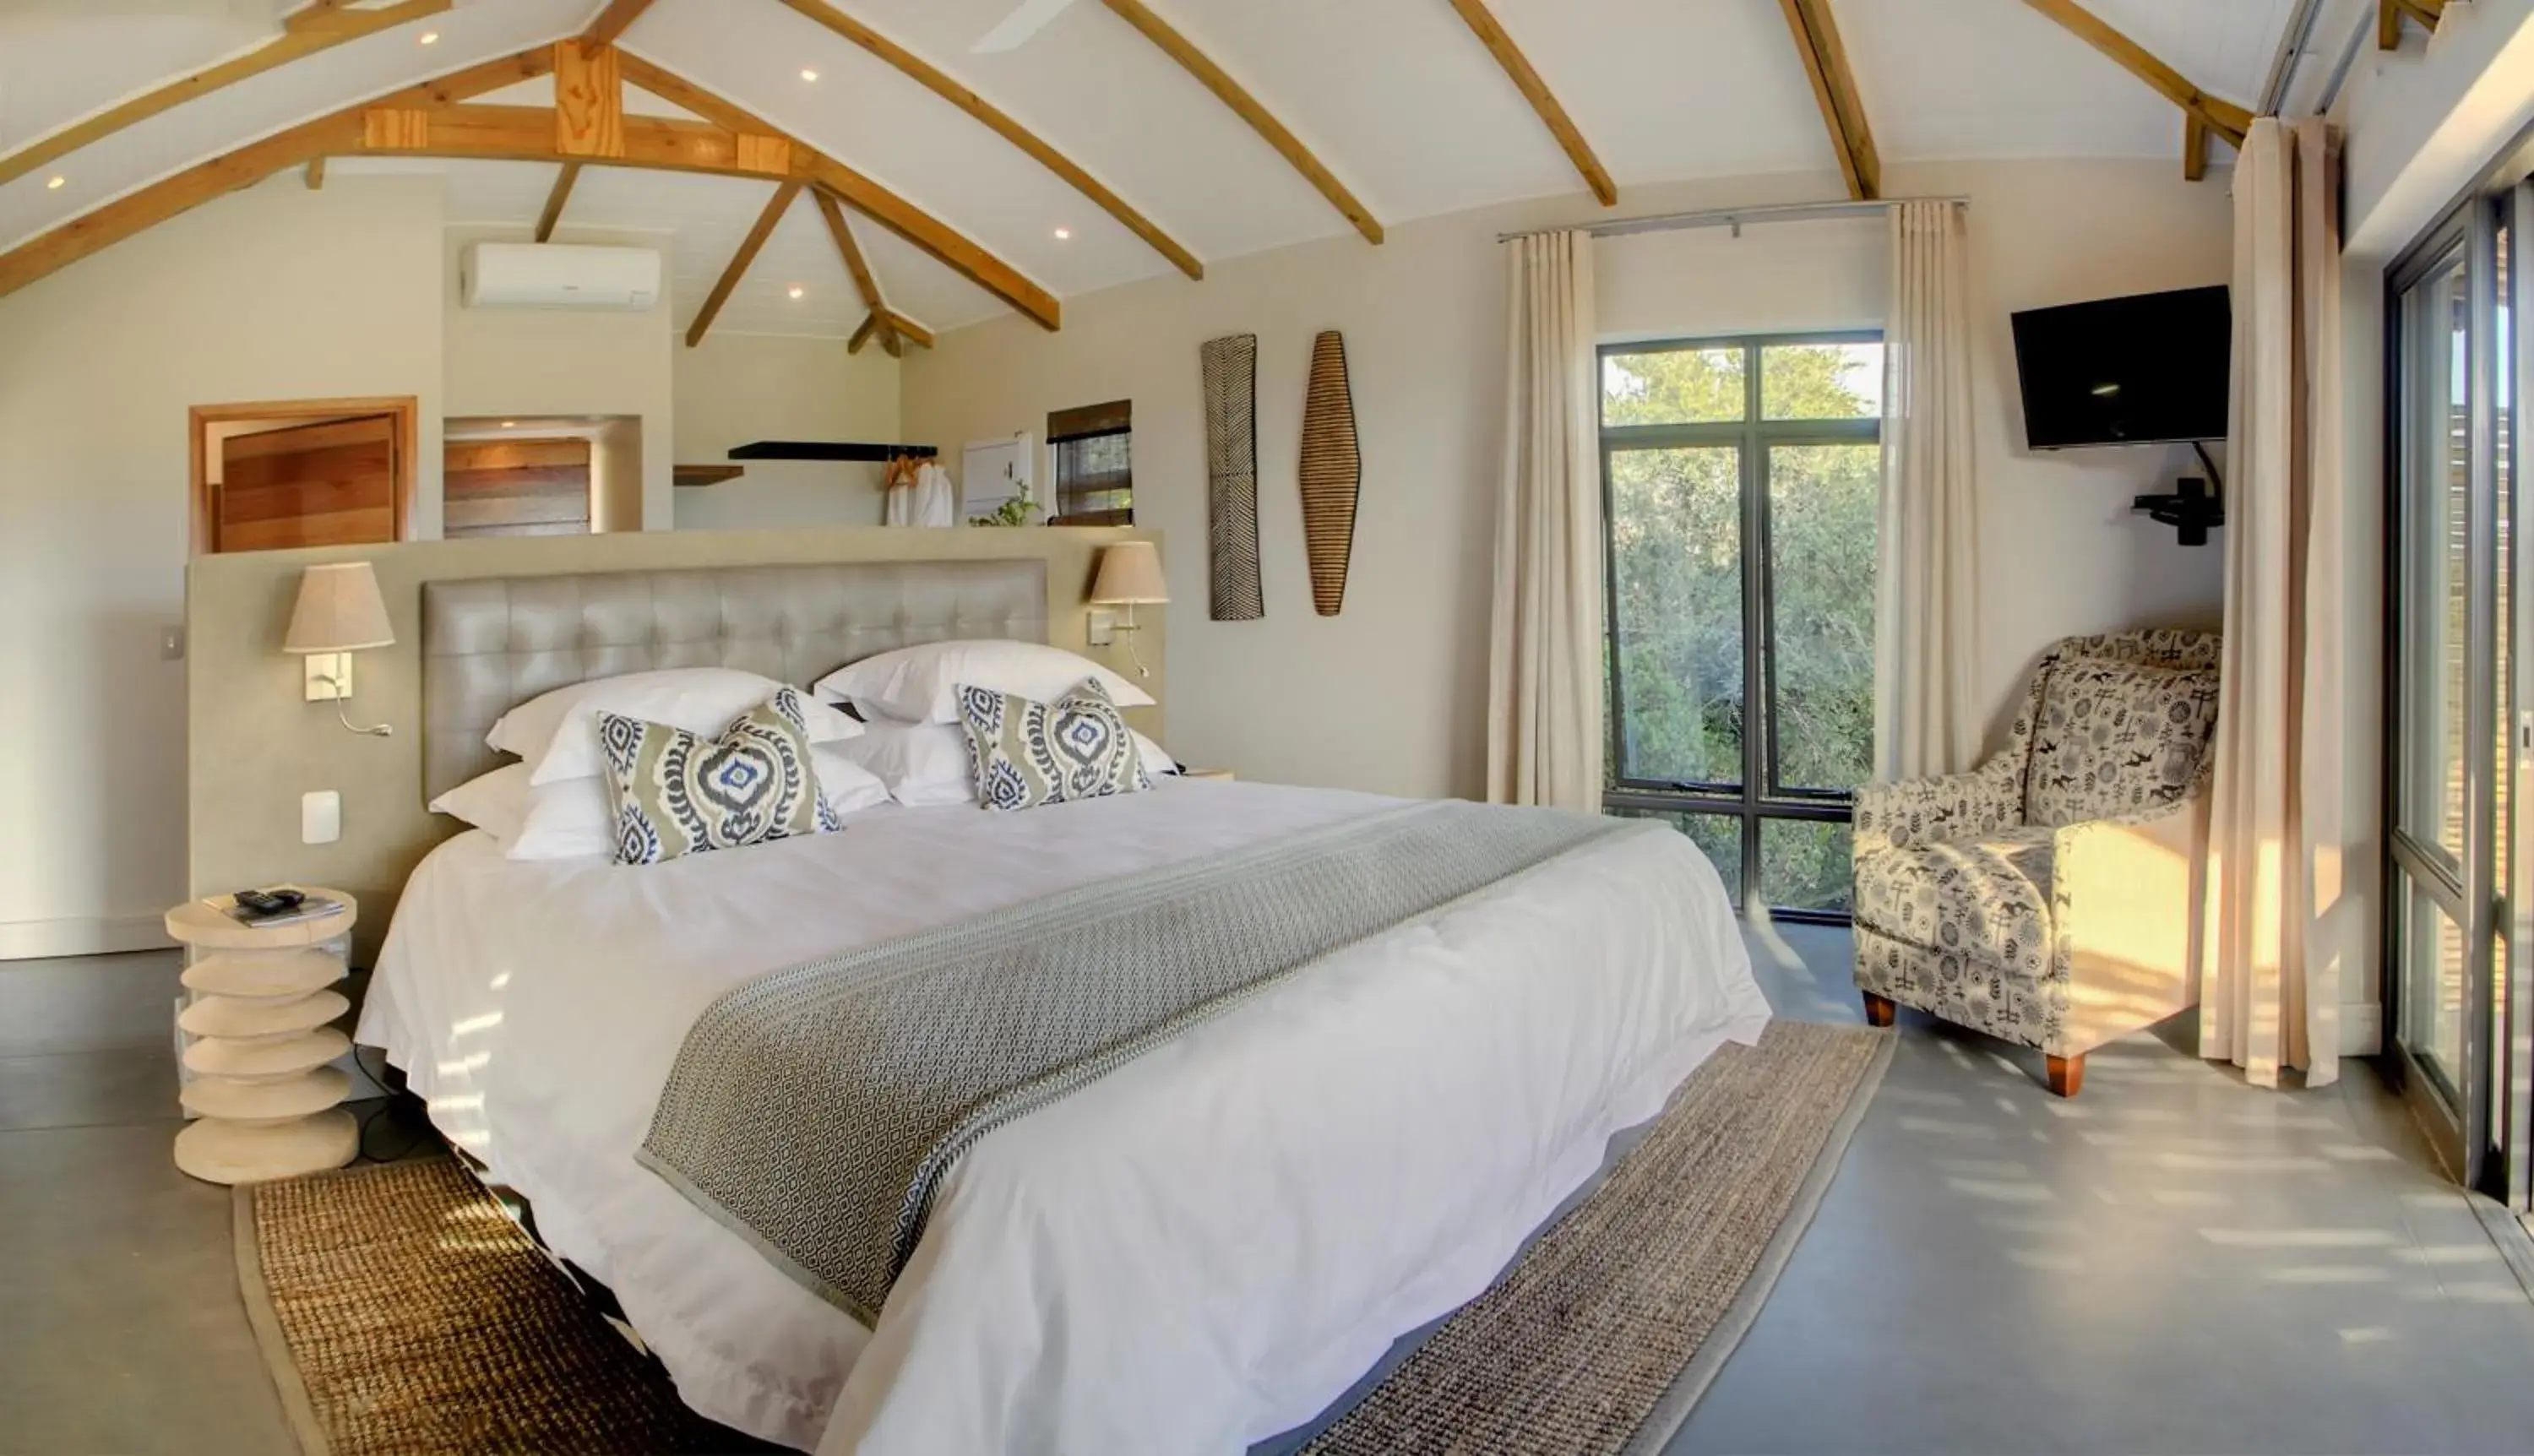 Bed, Room Photo in Garden Route Game Lodge